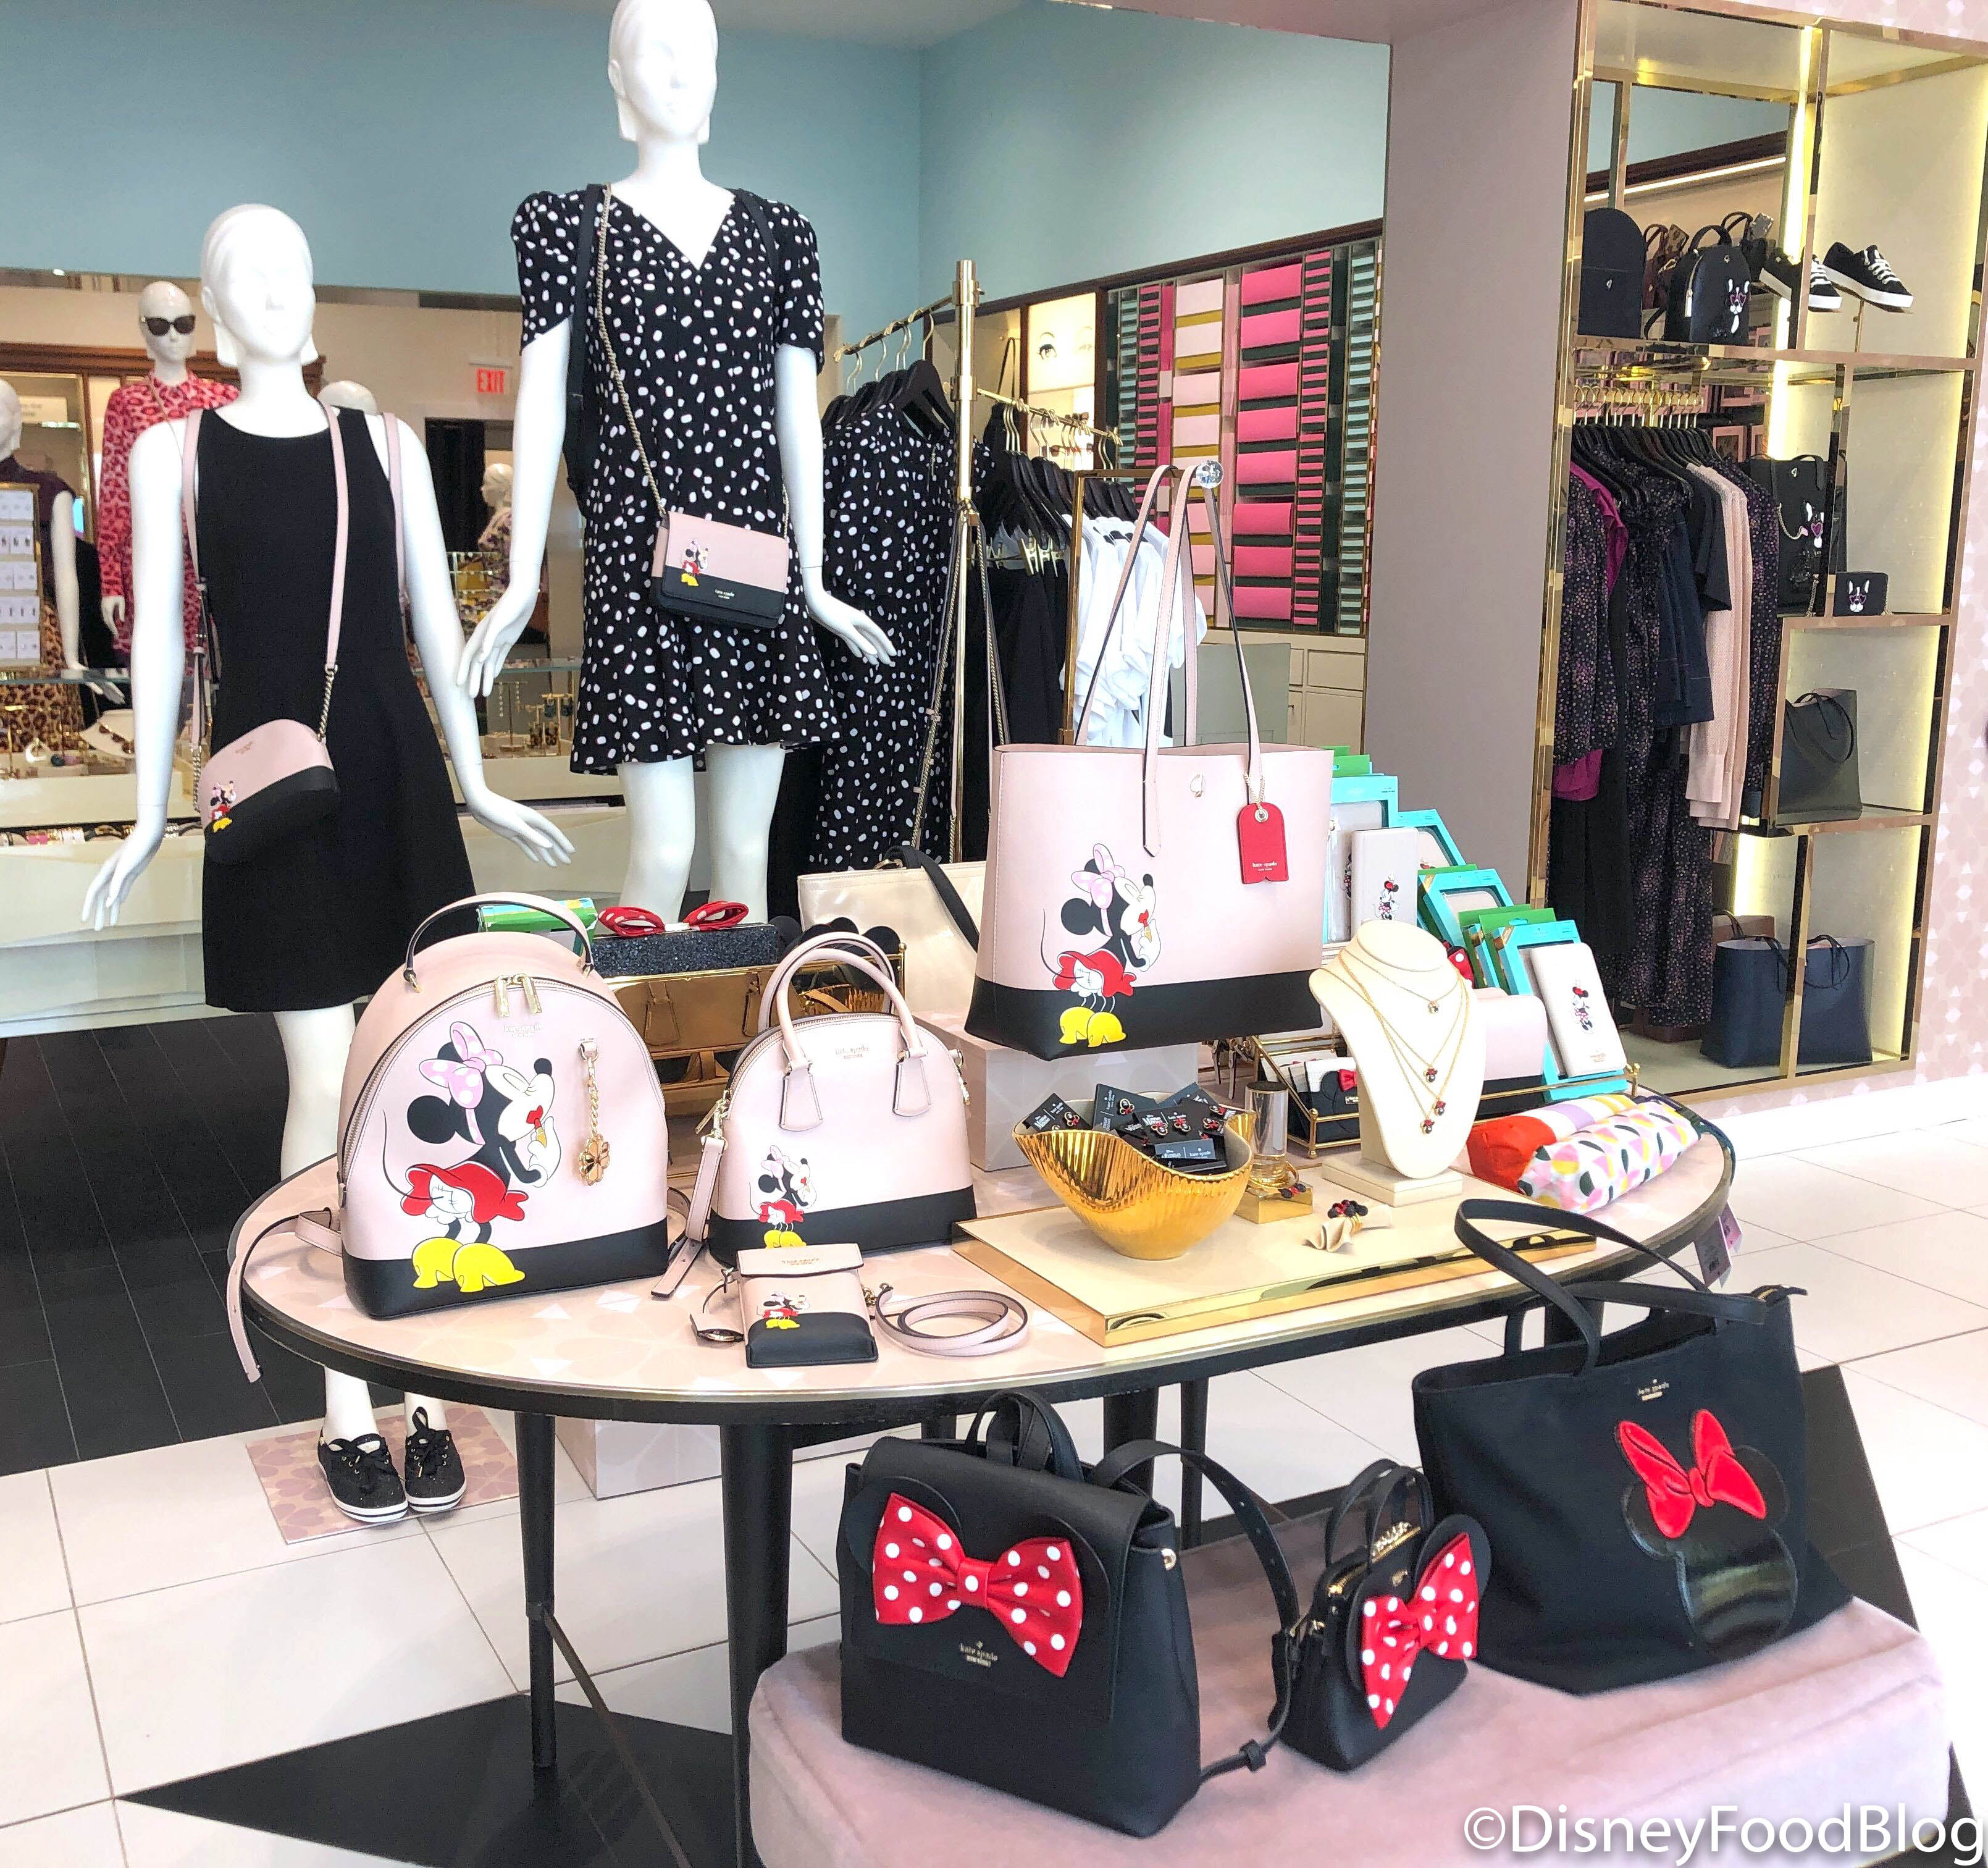 This SECRET Site Has Major Discounts on Disney's Kate Spade Collection